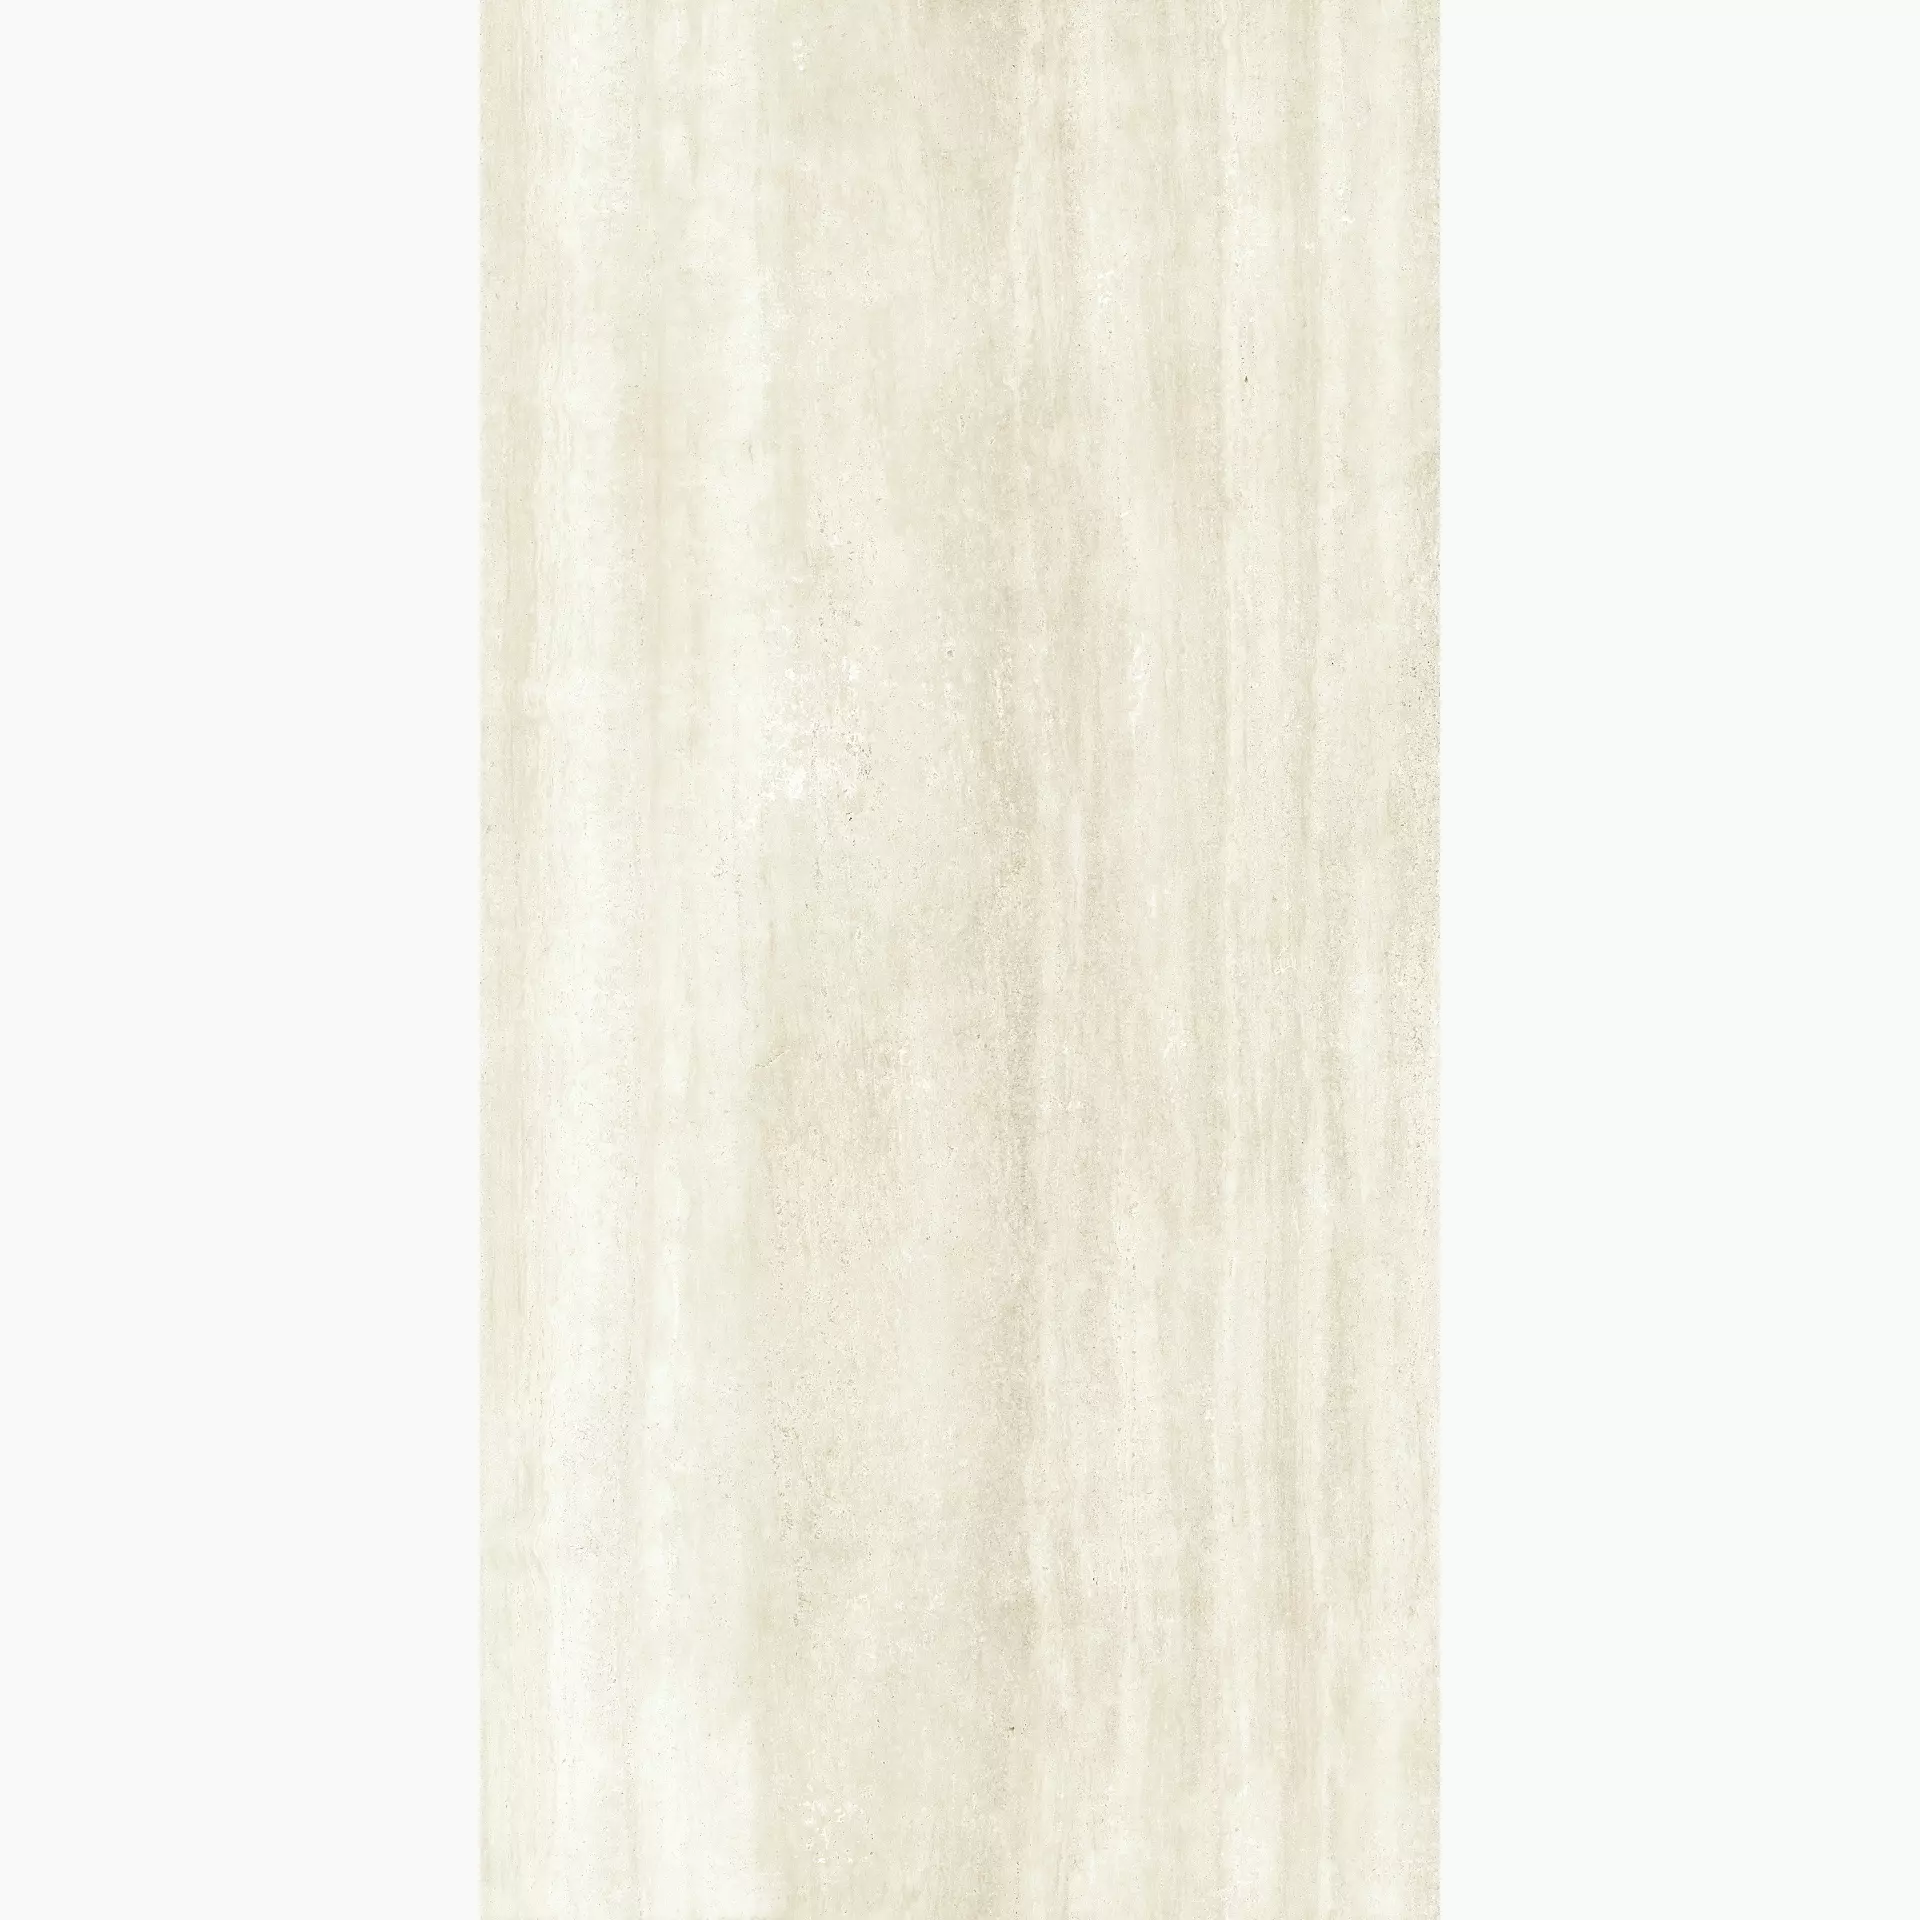 Coem Touchstone White Vein Naturale 0TV361R 30,2x60,4cm rectified 9mm